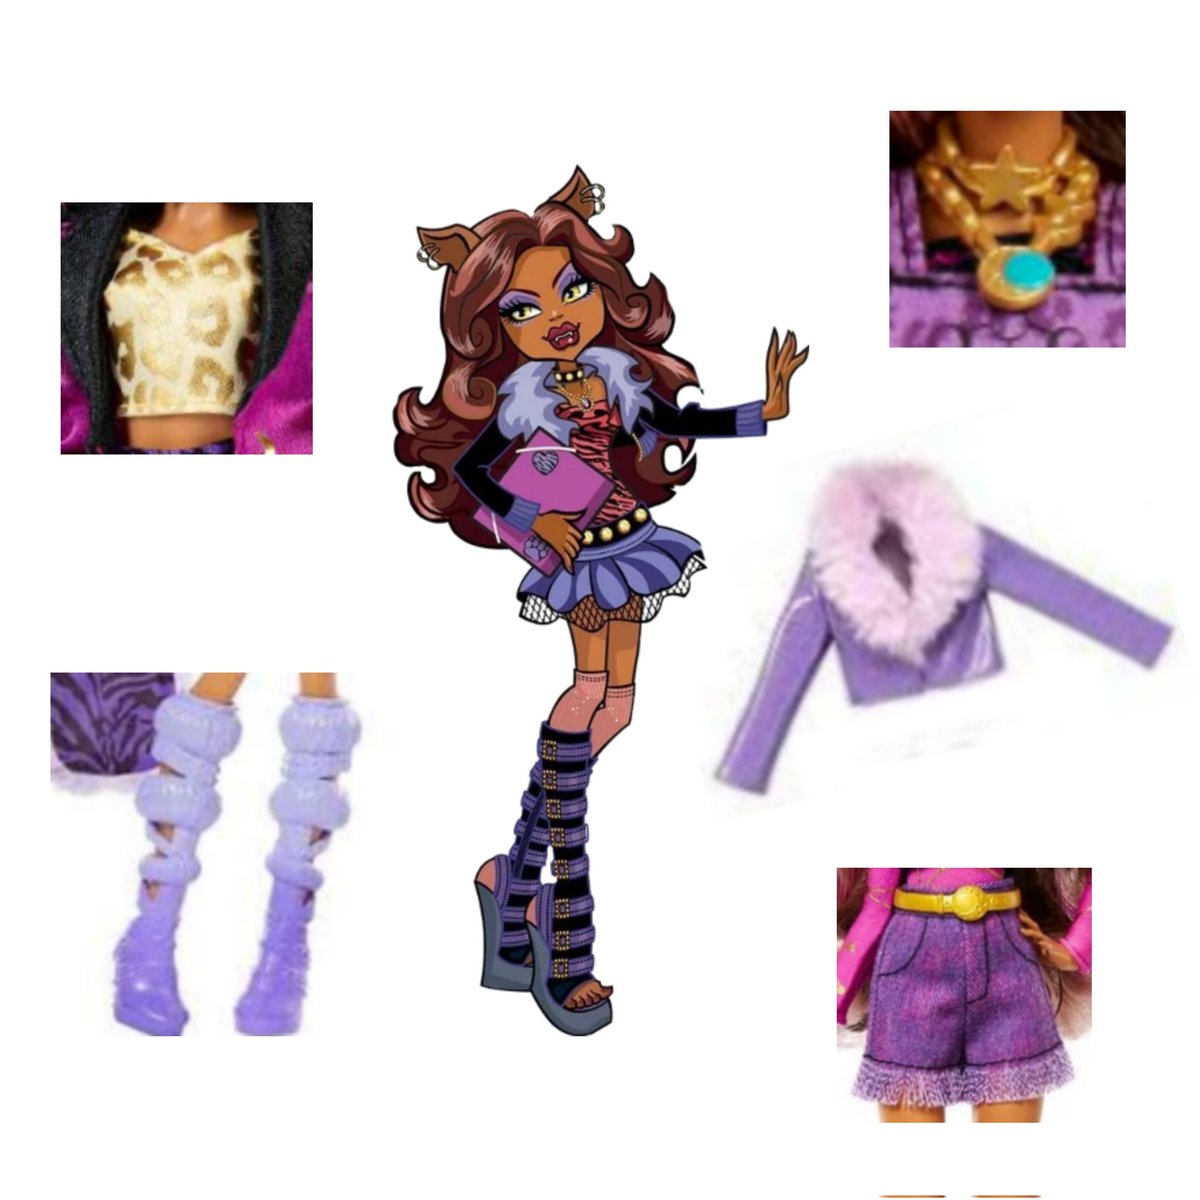 What if G1 core Clawdeen was designed in G3 kinda